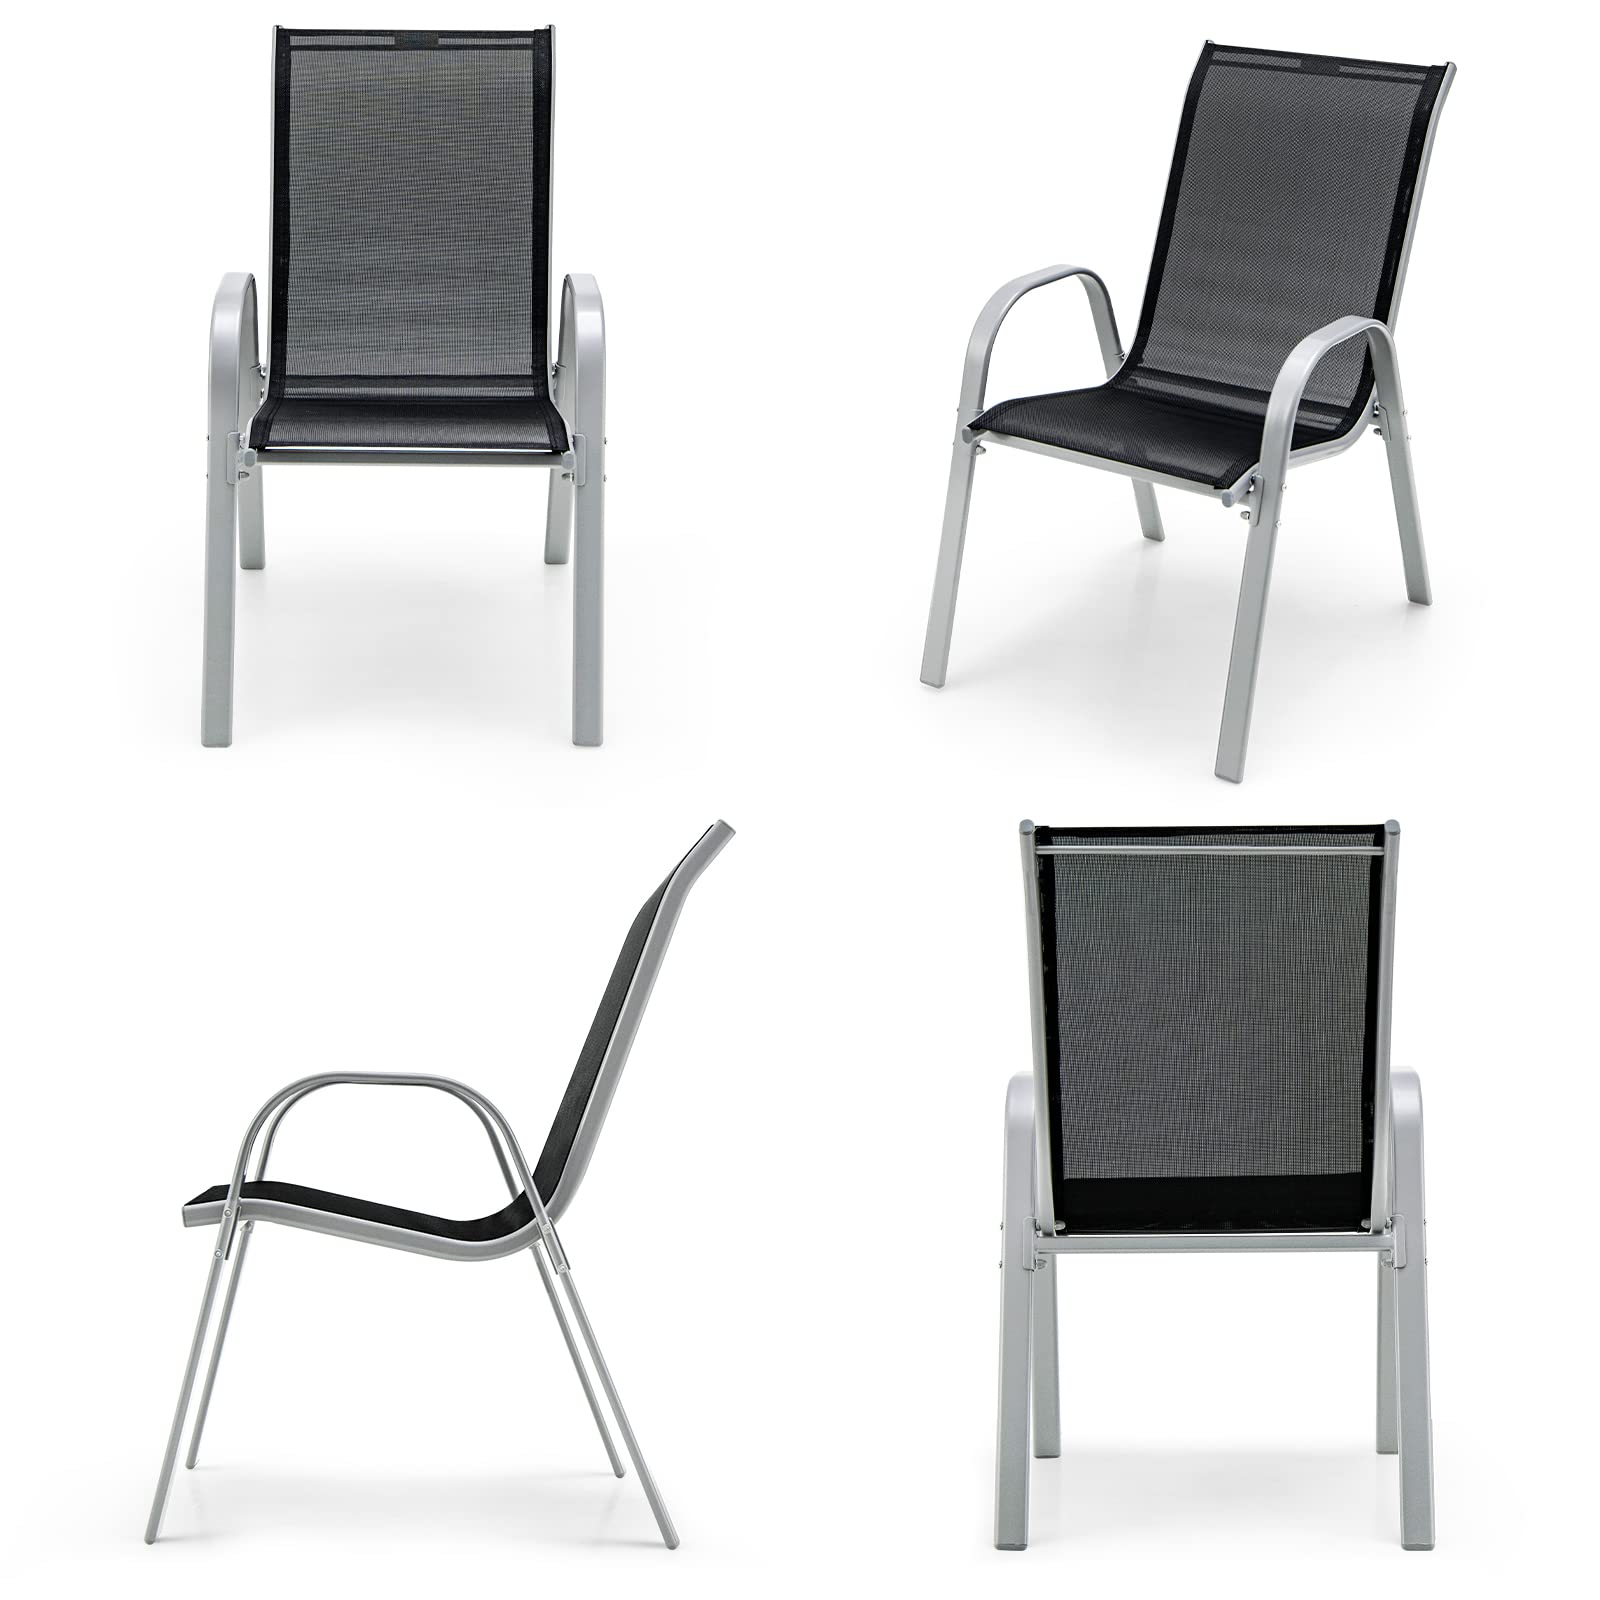 Giantex Set of 4 Patio Chairs, Stackable Outdoor Dining Chairs